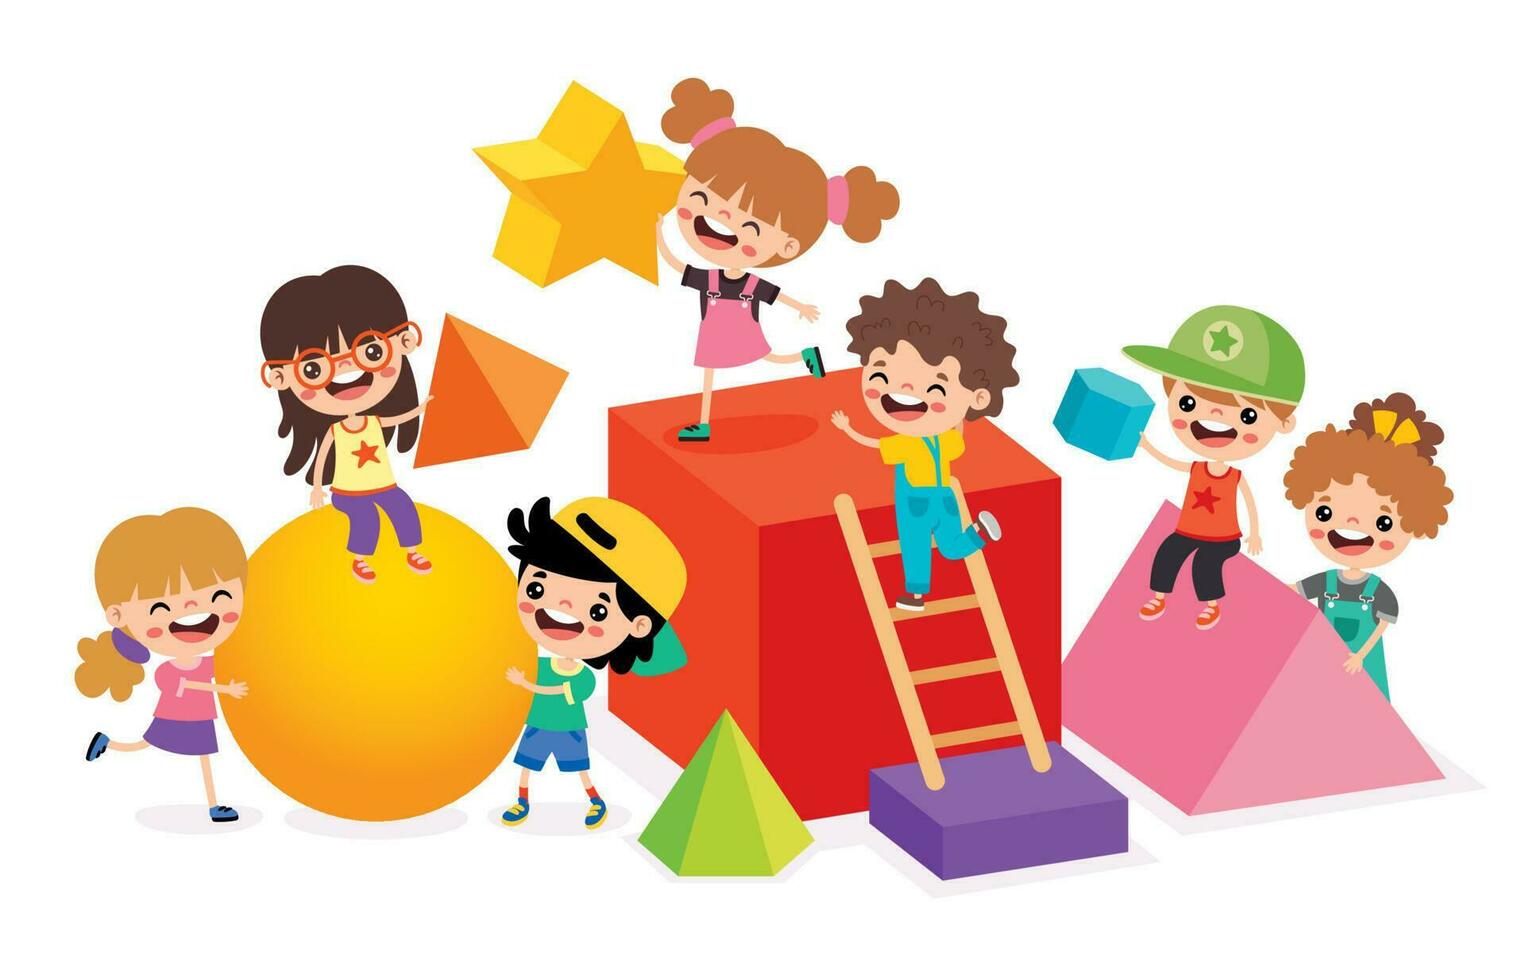 Kids Playing With 3d Geometric Shapes vector